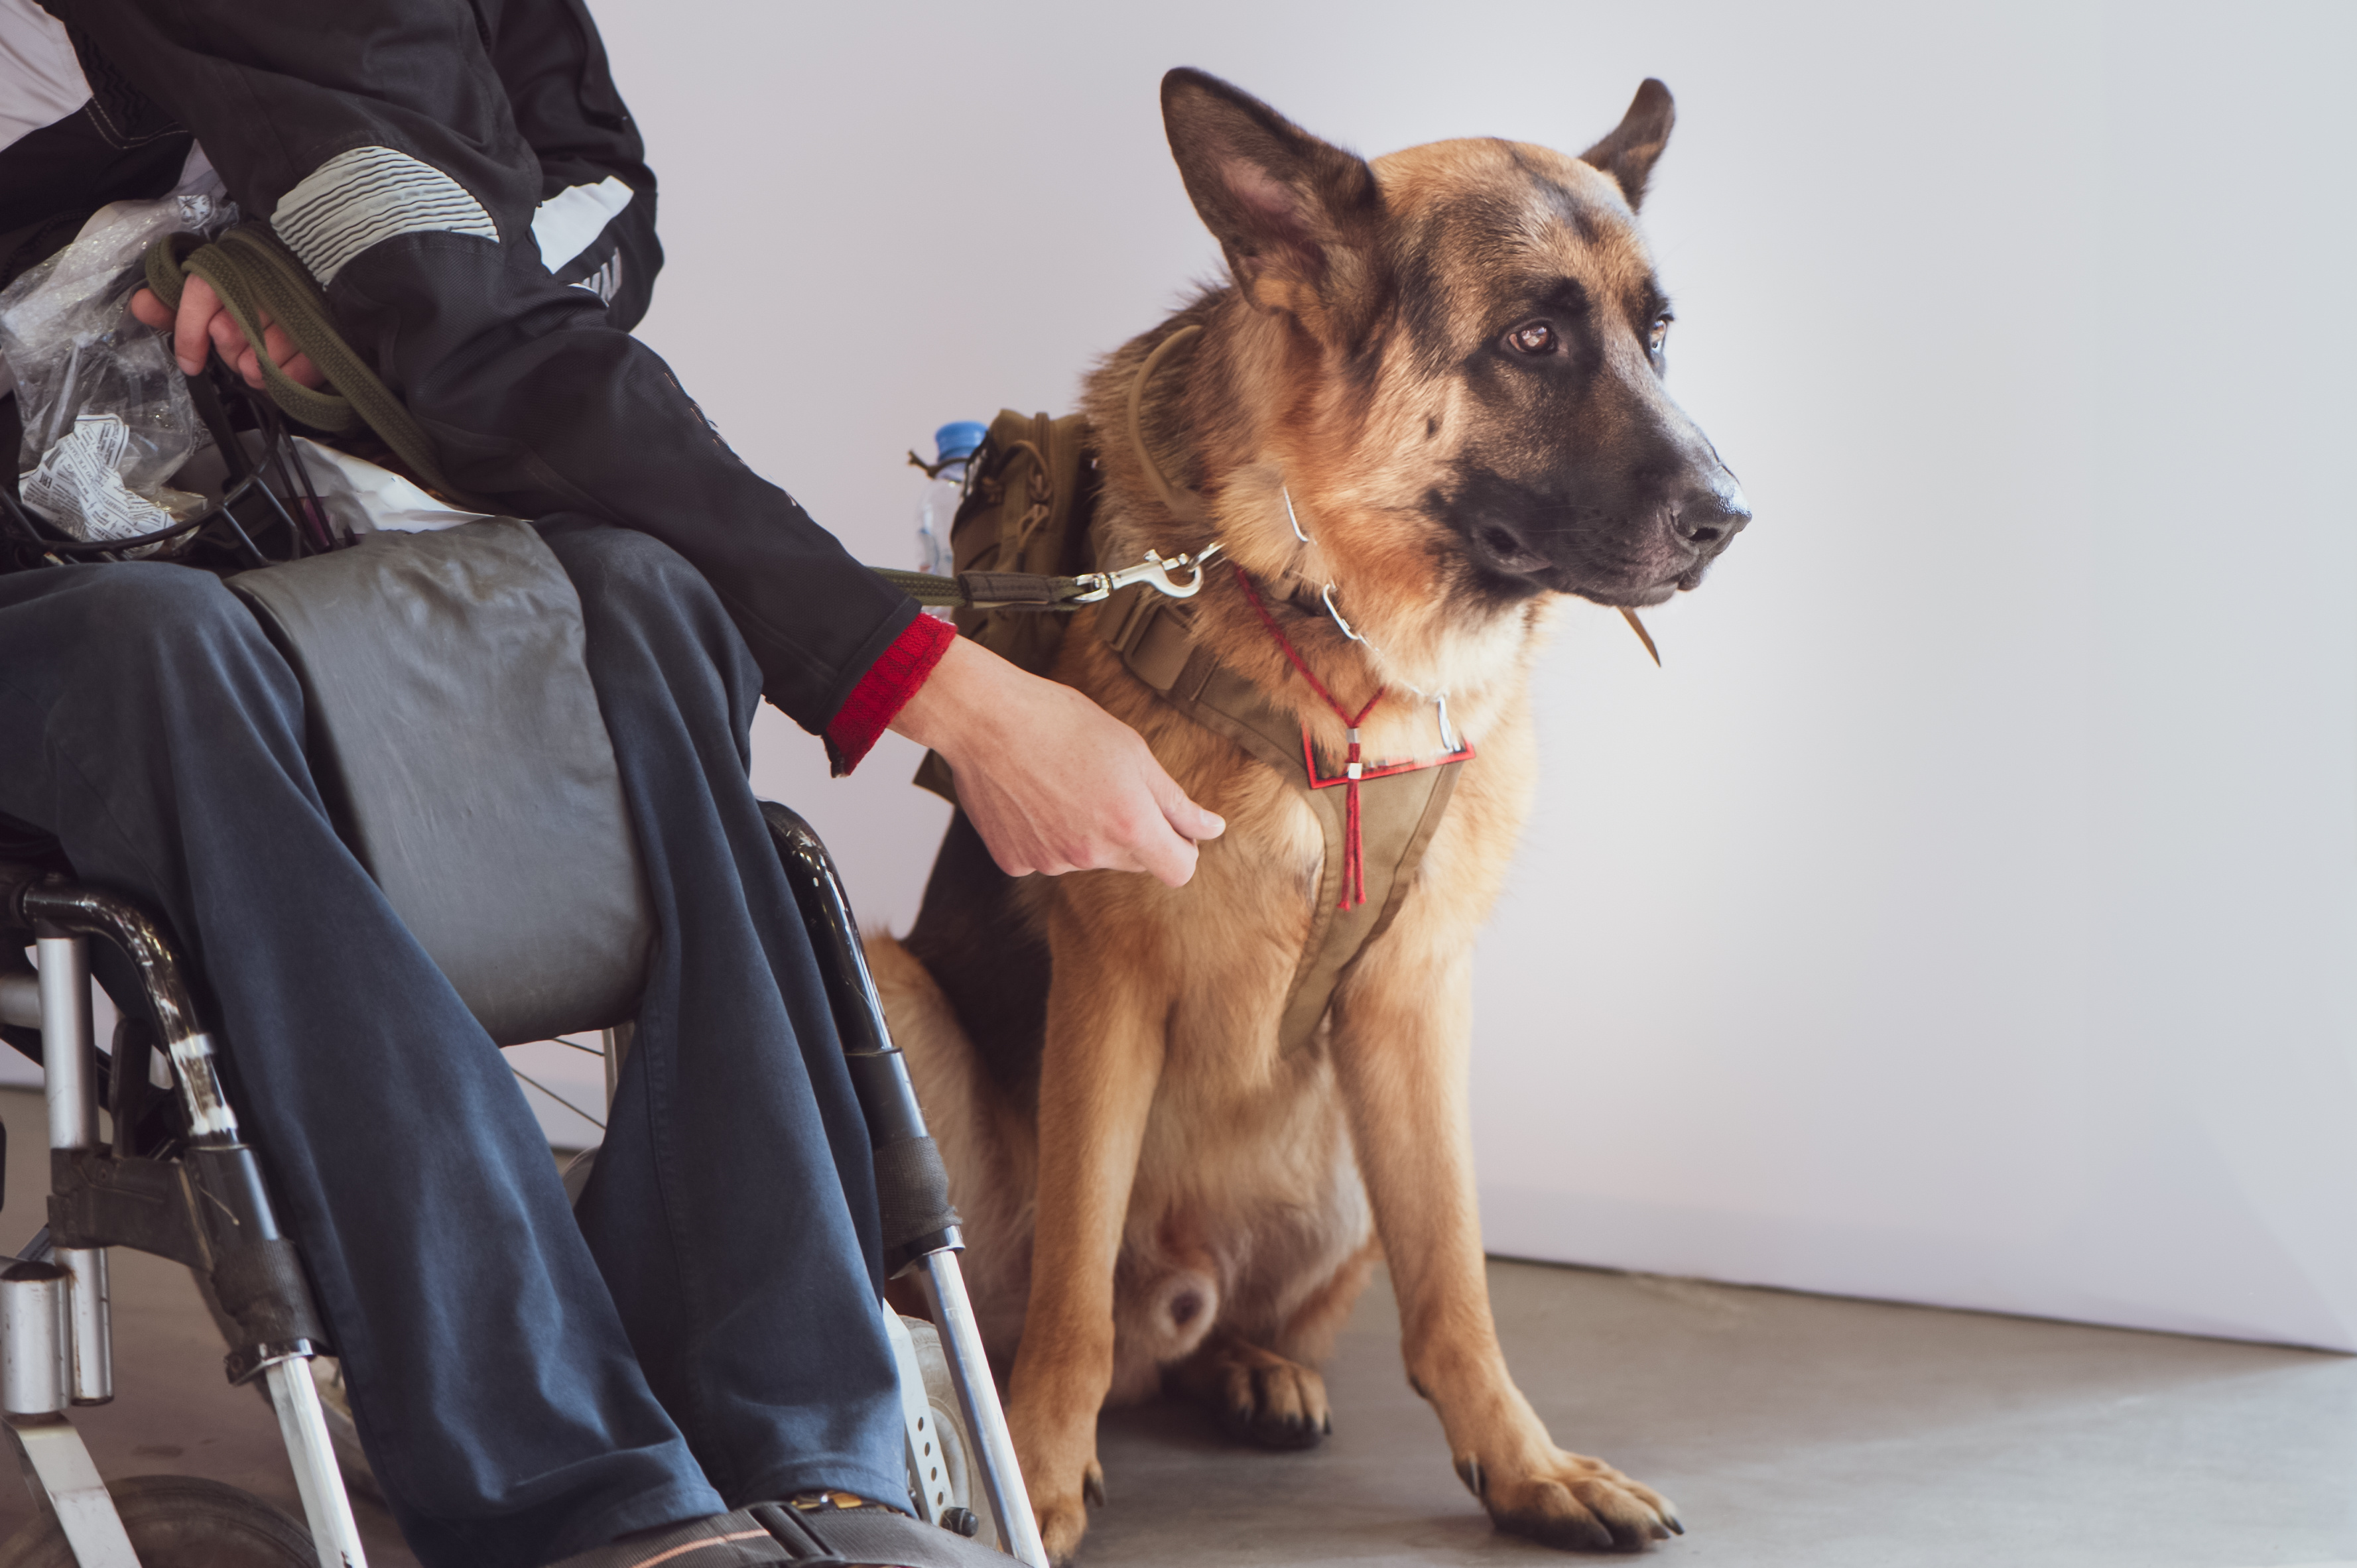 A service dog sitting obediently next to the wheelchair of its owner.